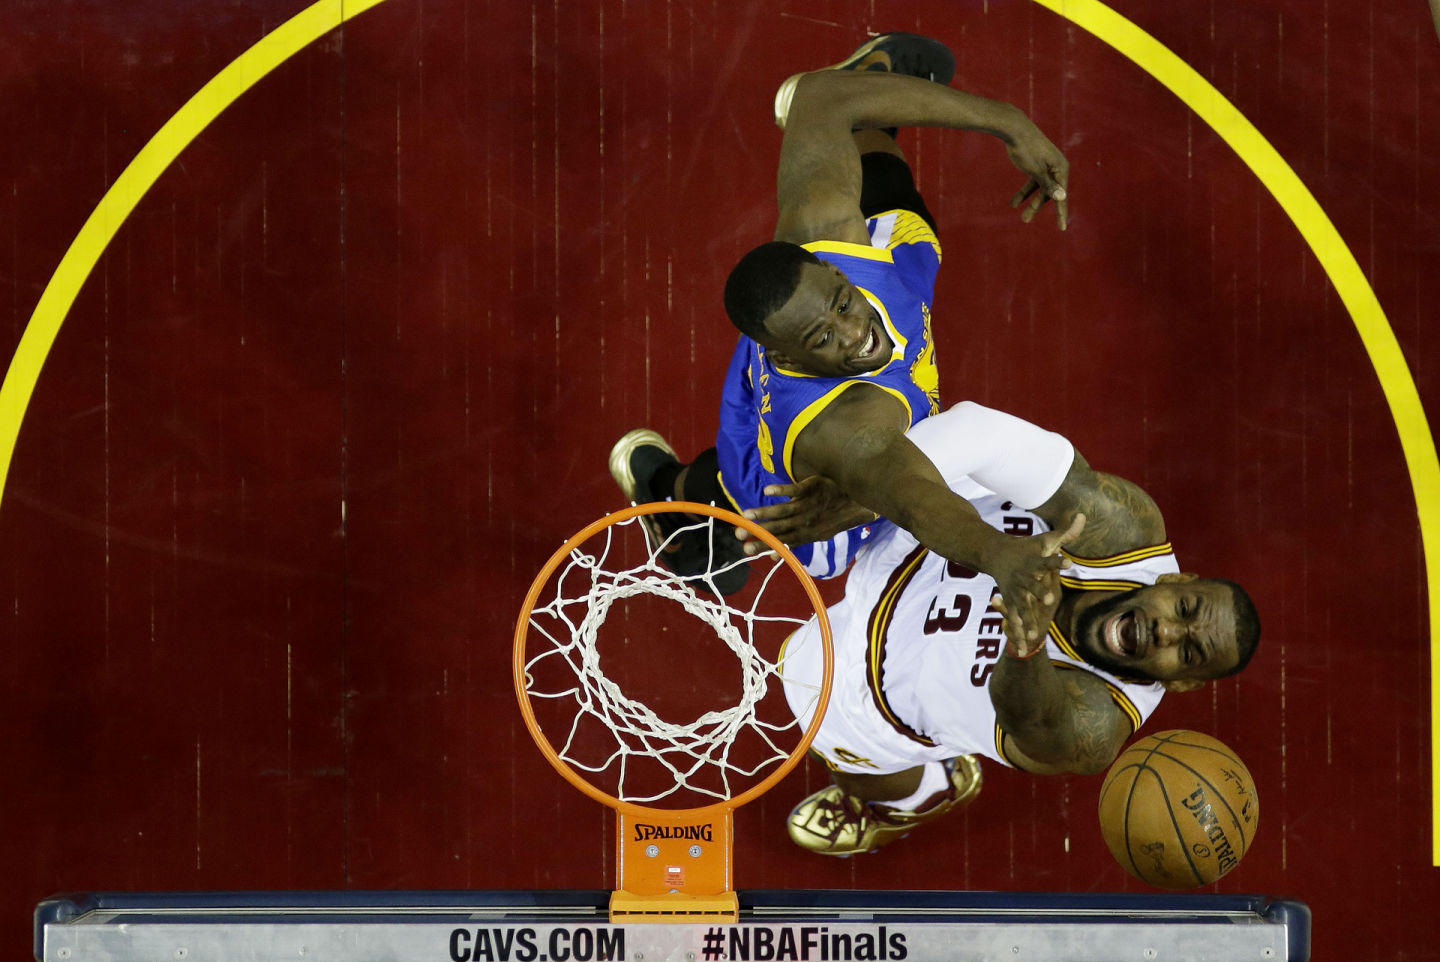 Draymond Green blocks a shot by LeBron James during Game 6 of last year's NBA Finals. (Tony Dejak-Pool/Getty Images)